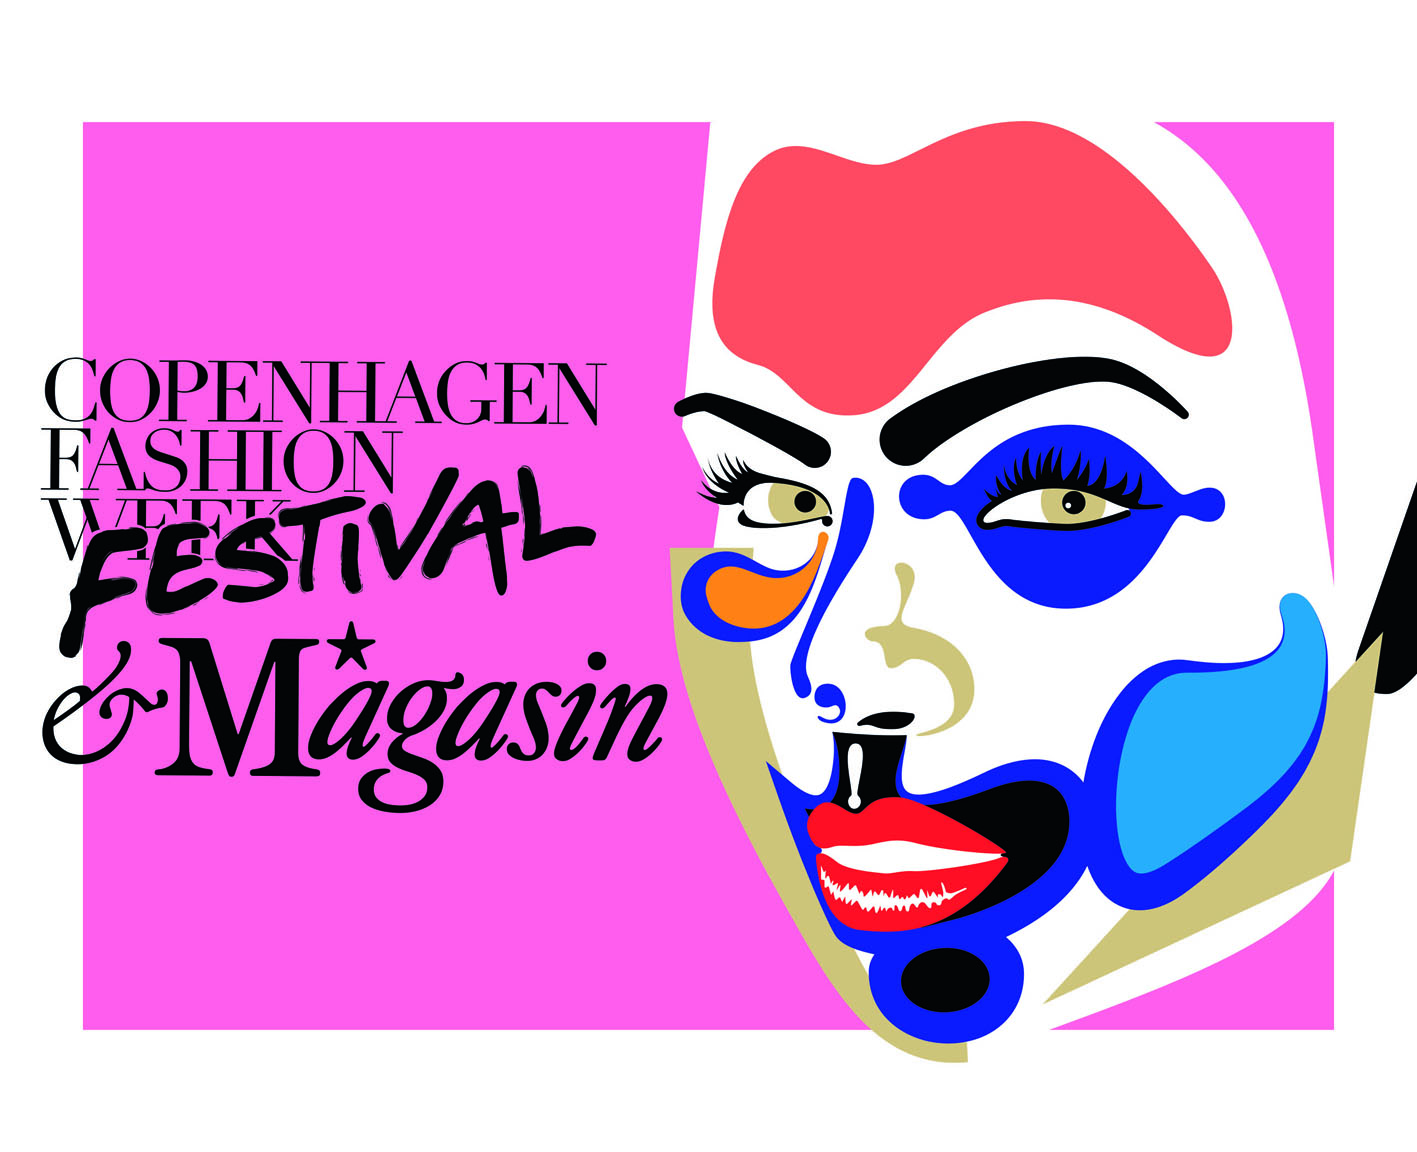 Fashionweek & Magasin is having a new venue, on the other side of the street to Magasin, Bremerholmen 6. Go check it out for fashiontalks and other fashion events.